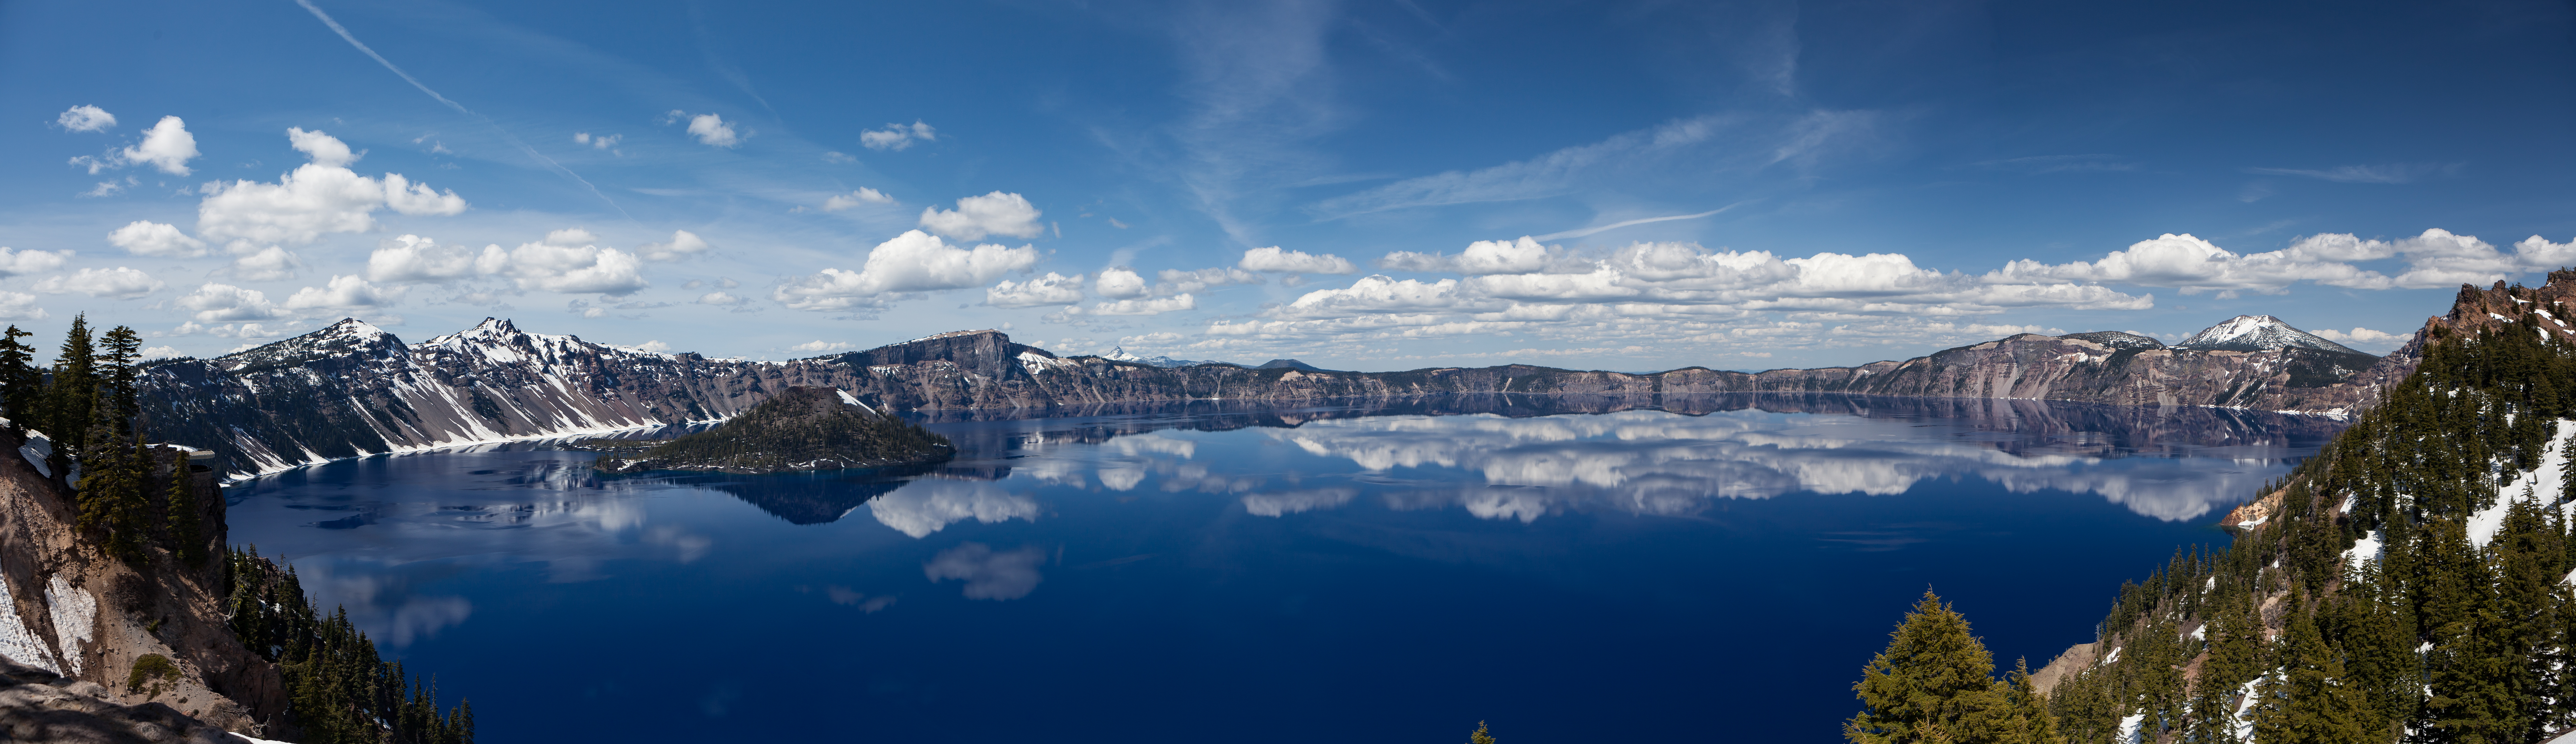 Snow Winter Lake Reflection Trees Clouds Mountains Photography Sky Crater Lake Oregon 10542x3047